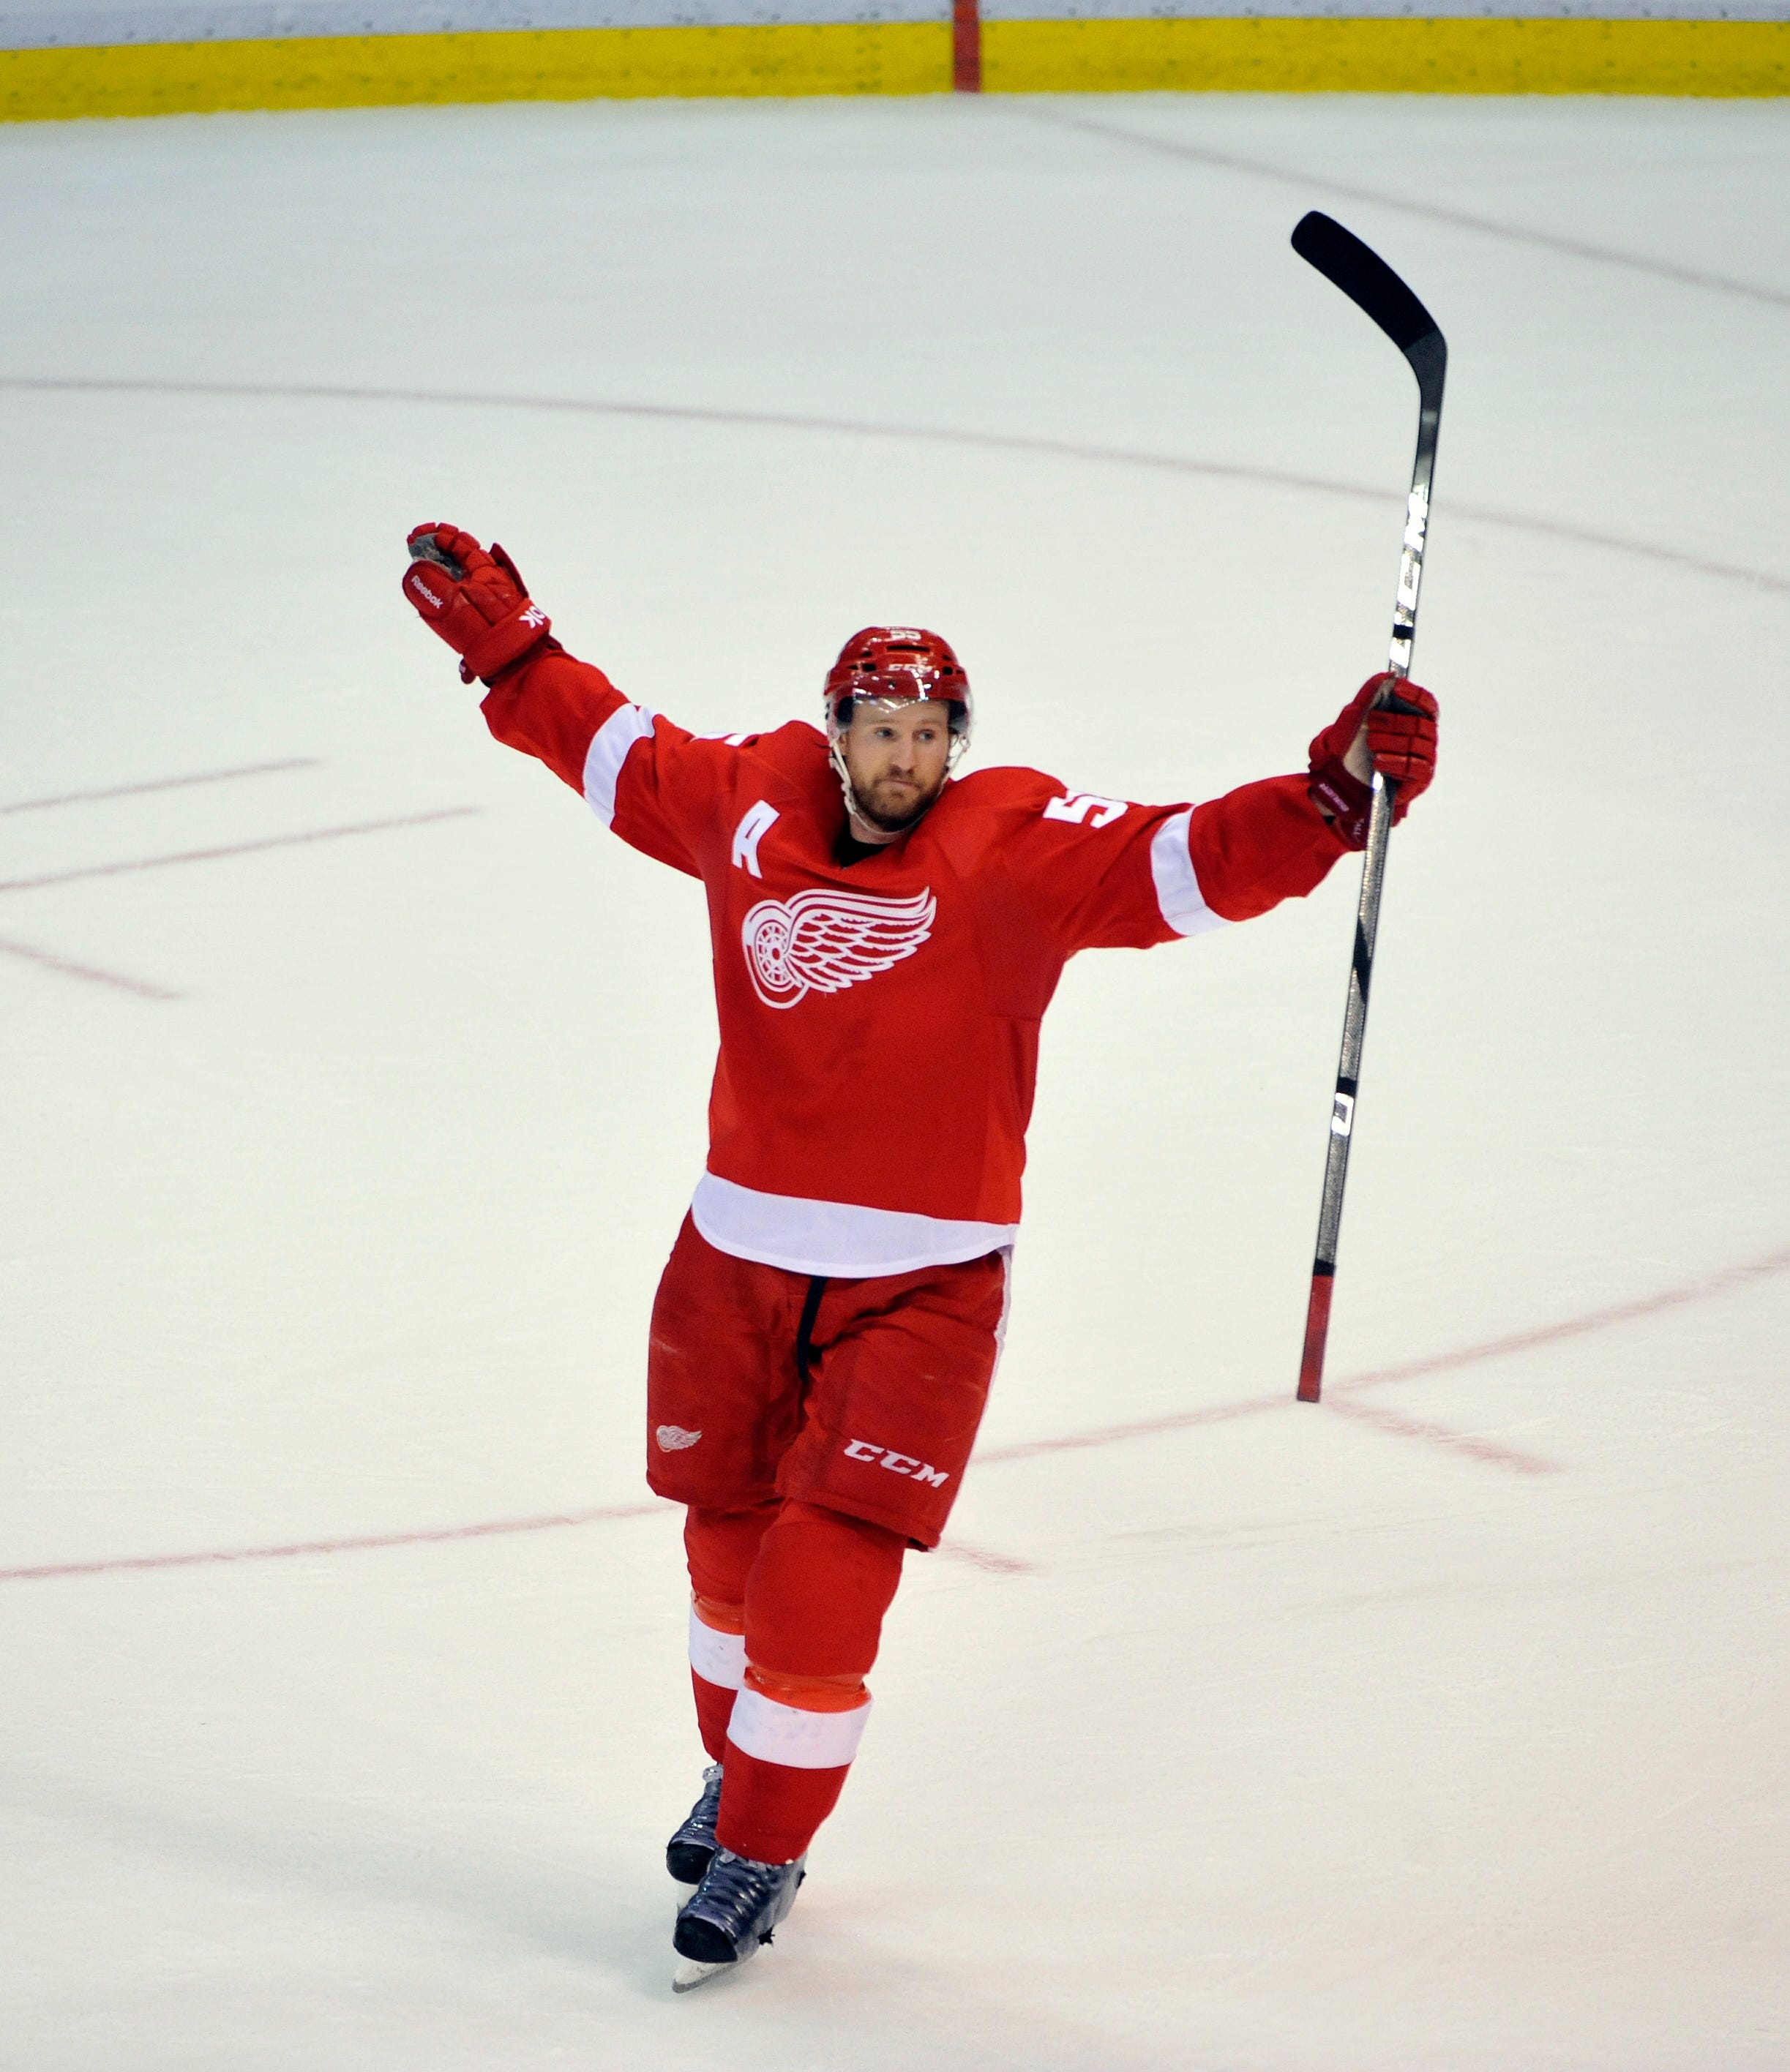 Detroit alternate captain Niklas Kronwall lifts his arms in victory as the final seconds of a 2-0 victory over Chicago tick away. The Wings took a 3-1 series against the Blackhawks at Joe Louis Arena in Detroit on May 23, 2013.